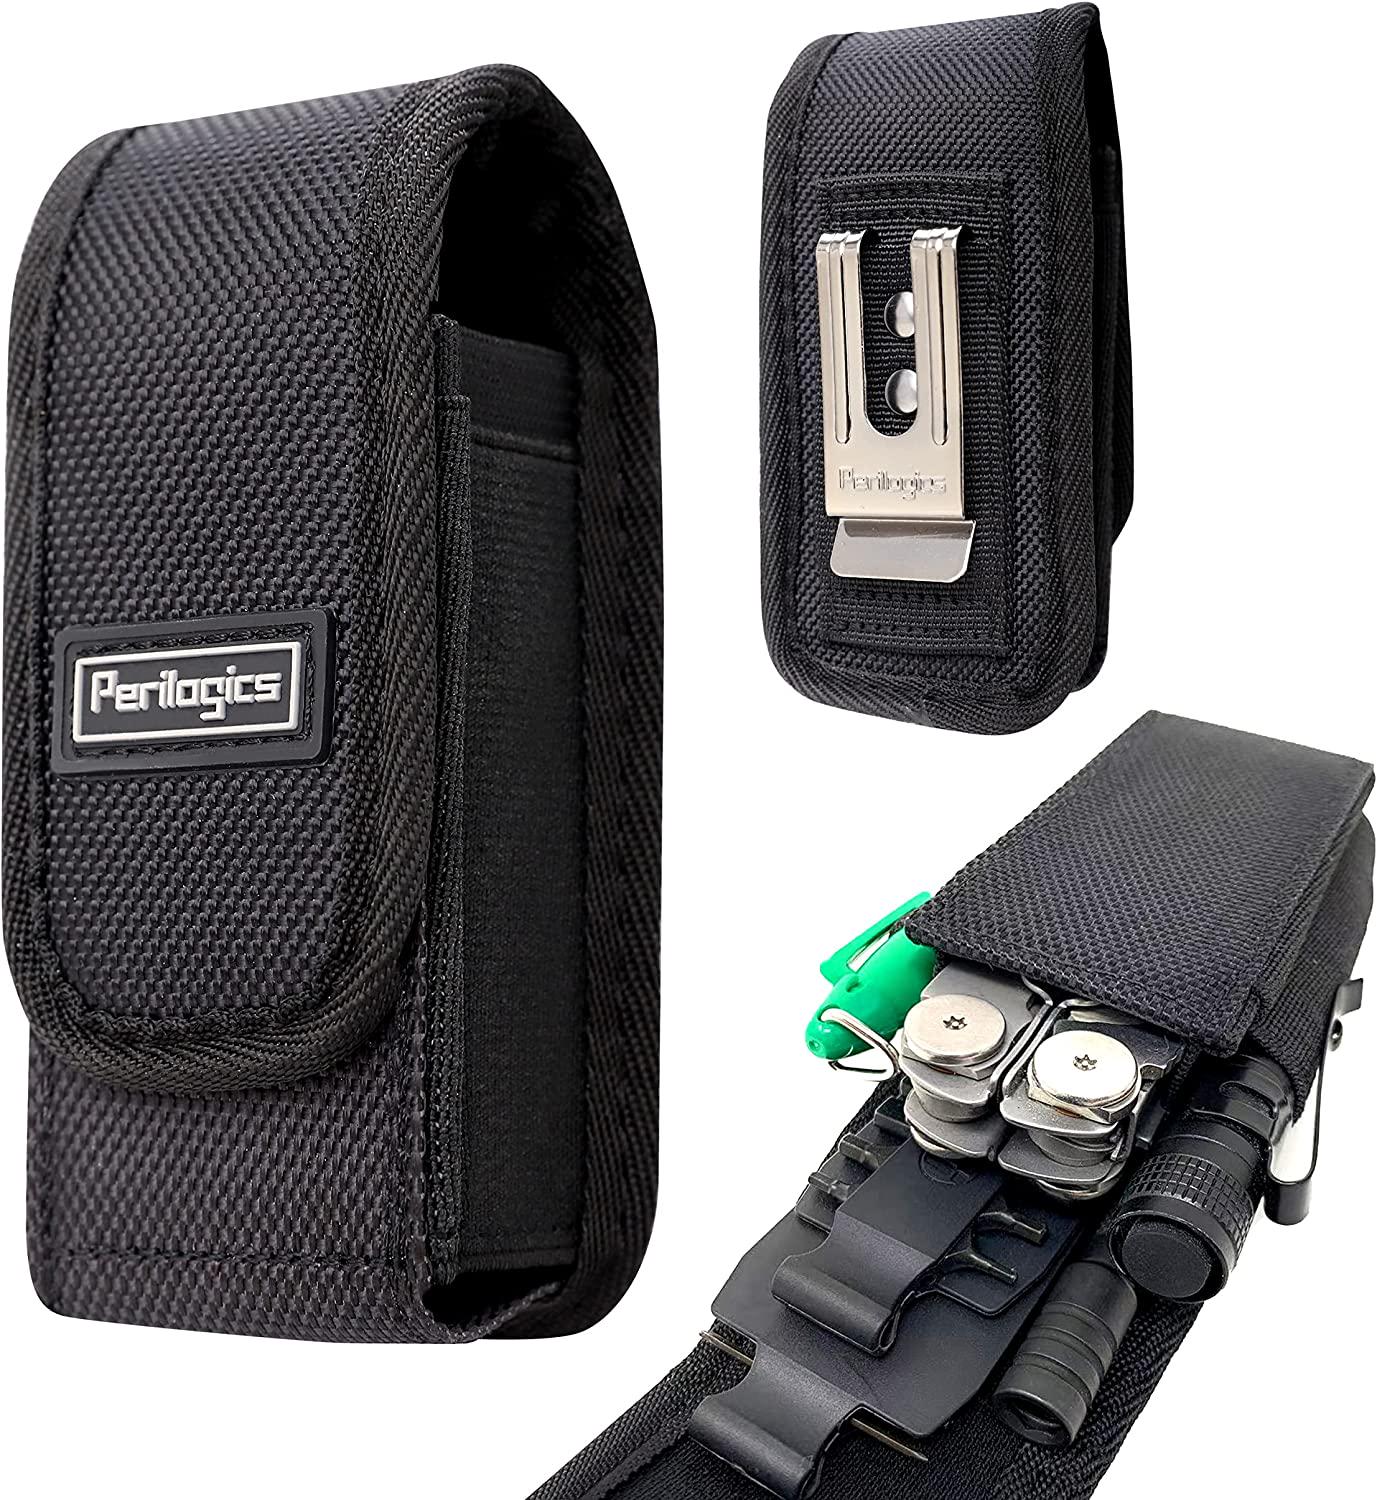 Perilogics, Leatherman Sheath Replacement by Perilogics. Magnetic Closure Pouch Fits Leatherman Wave Plus Wingman Charge Surge Super Tool 300 Signal. Fits Tool Up to 4.5 inch in Length